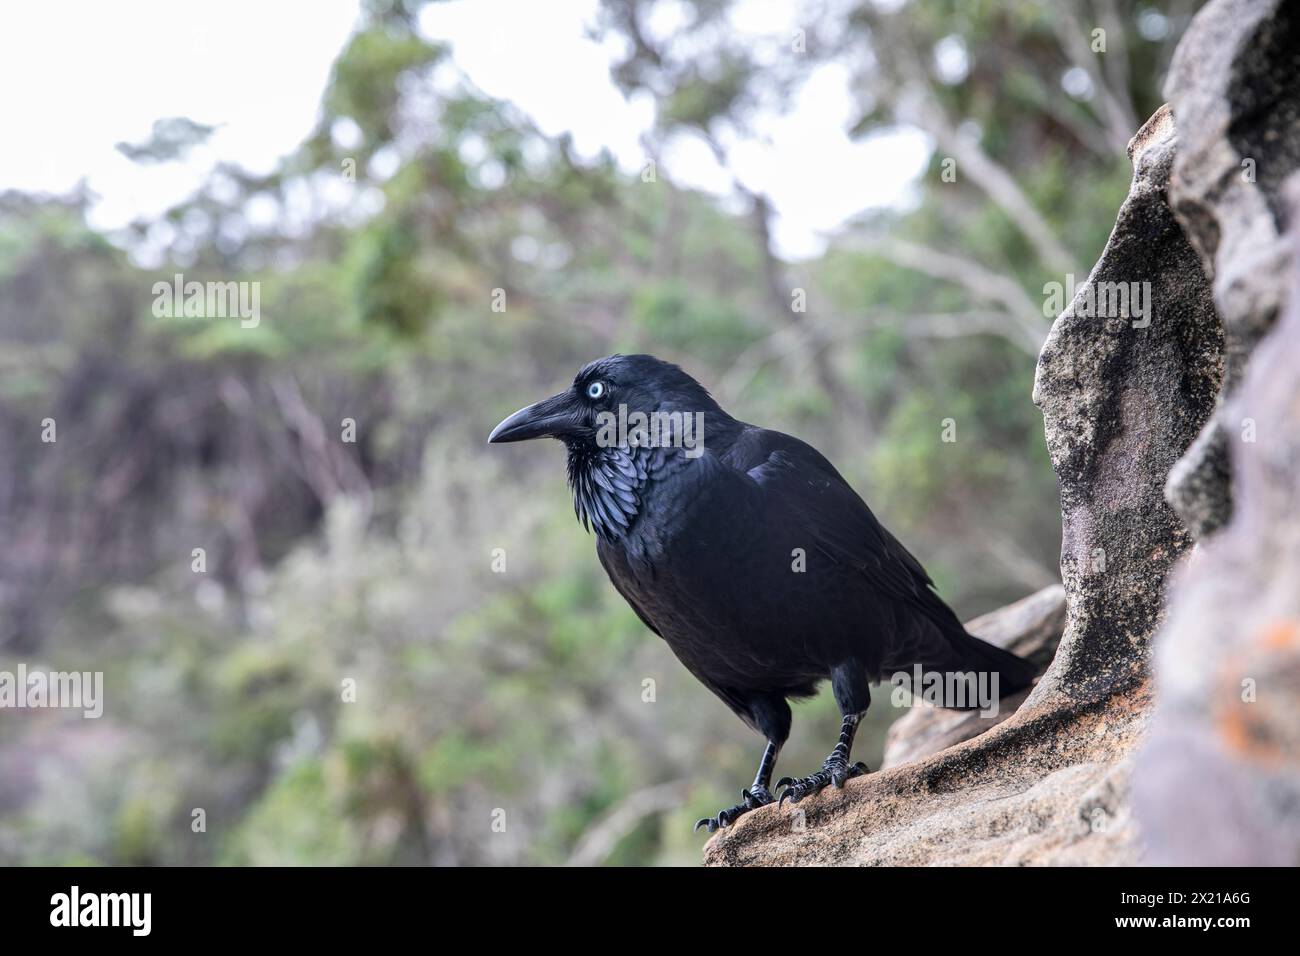 Australian raven, Corvus coronoides,  is a passerine corvid bird native to Australia, pictured here in Ku-Ring-Gai chase national park in Sydney,NSW Stock Photo